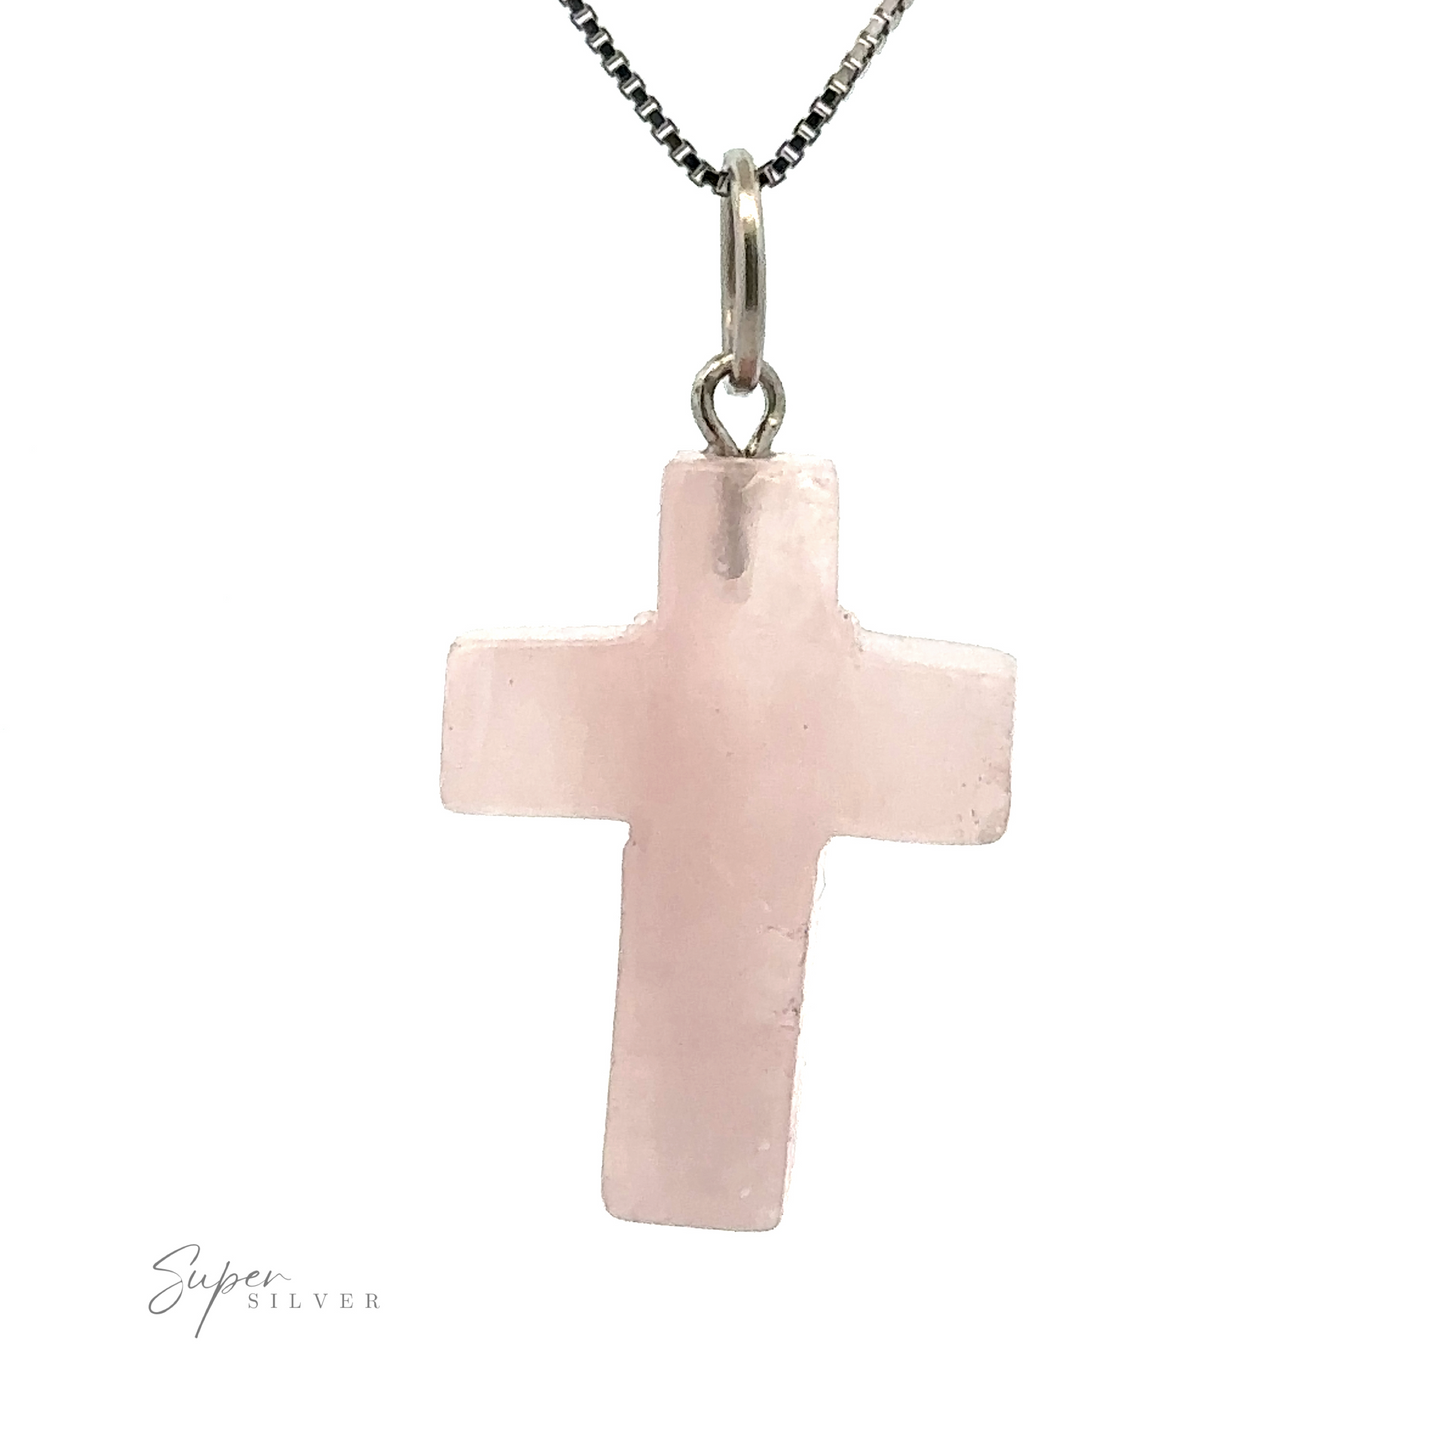 
                  
                    A Stone Cross Pendant with a pale pink rose quartz cross hanging from a silver chain. The polished stone cross features a simple design, and the text "Super Silver" is visible at the bottom left.
                  
                